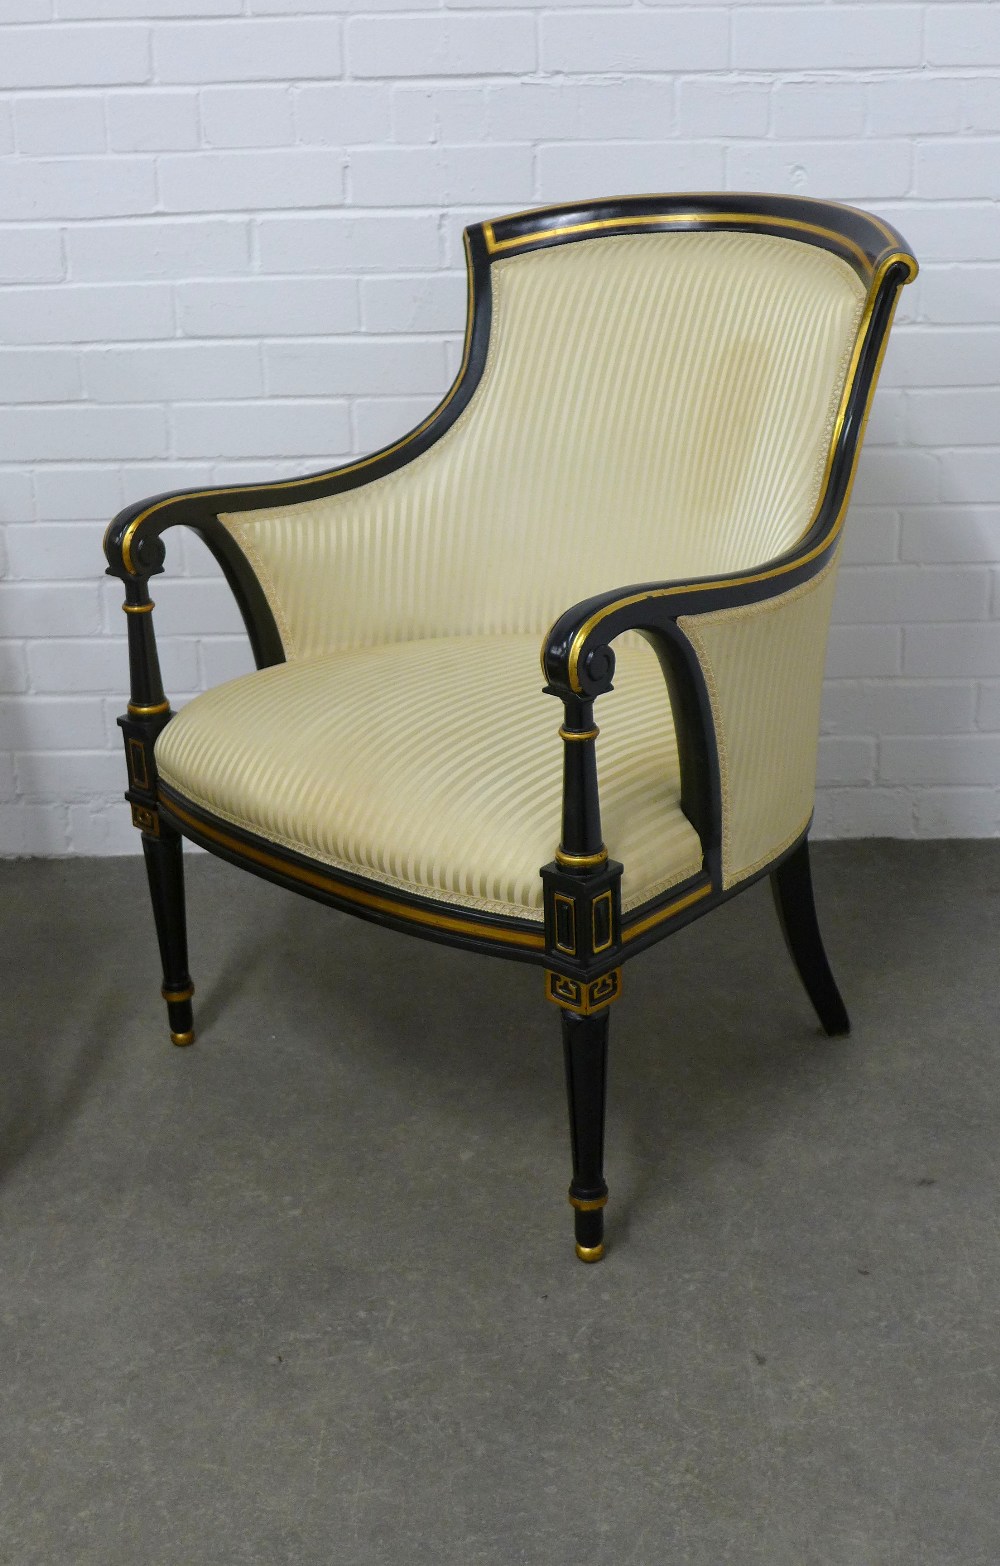 Pair of ebonised and parcel gilt open armchairs, with striped damask upholstery, on tapering legs, - Image 2 of 3